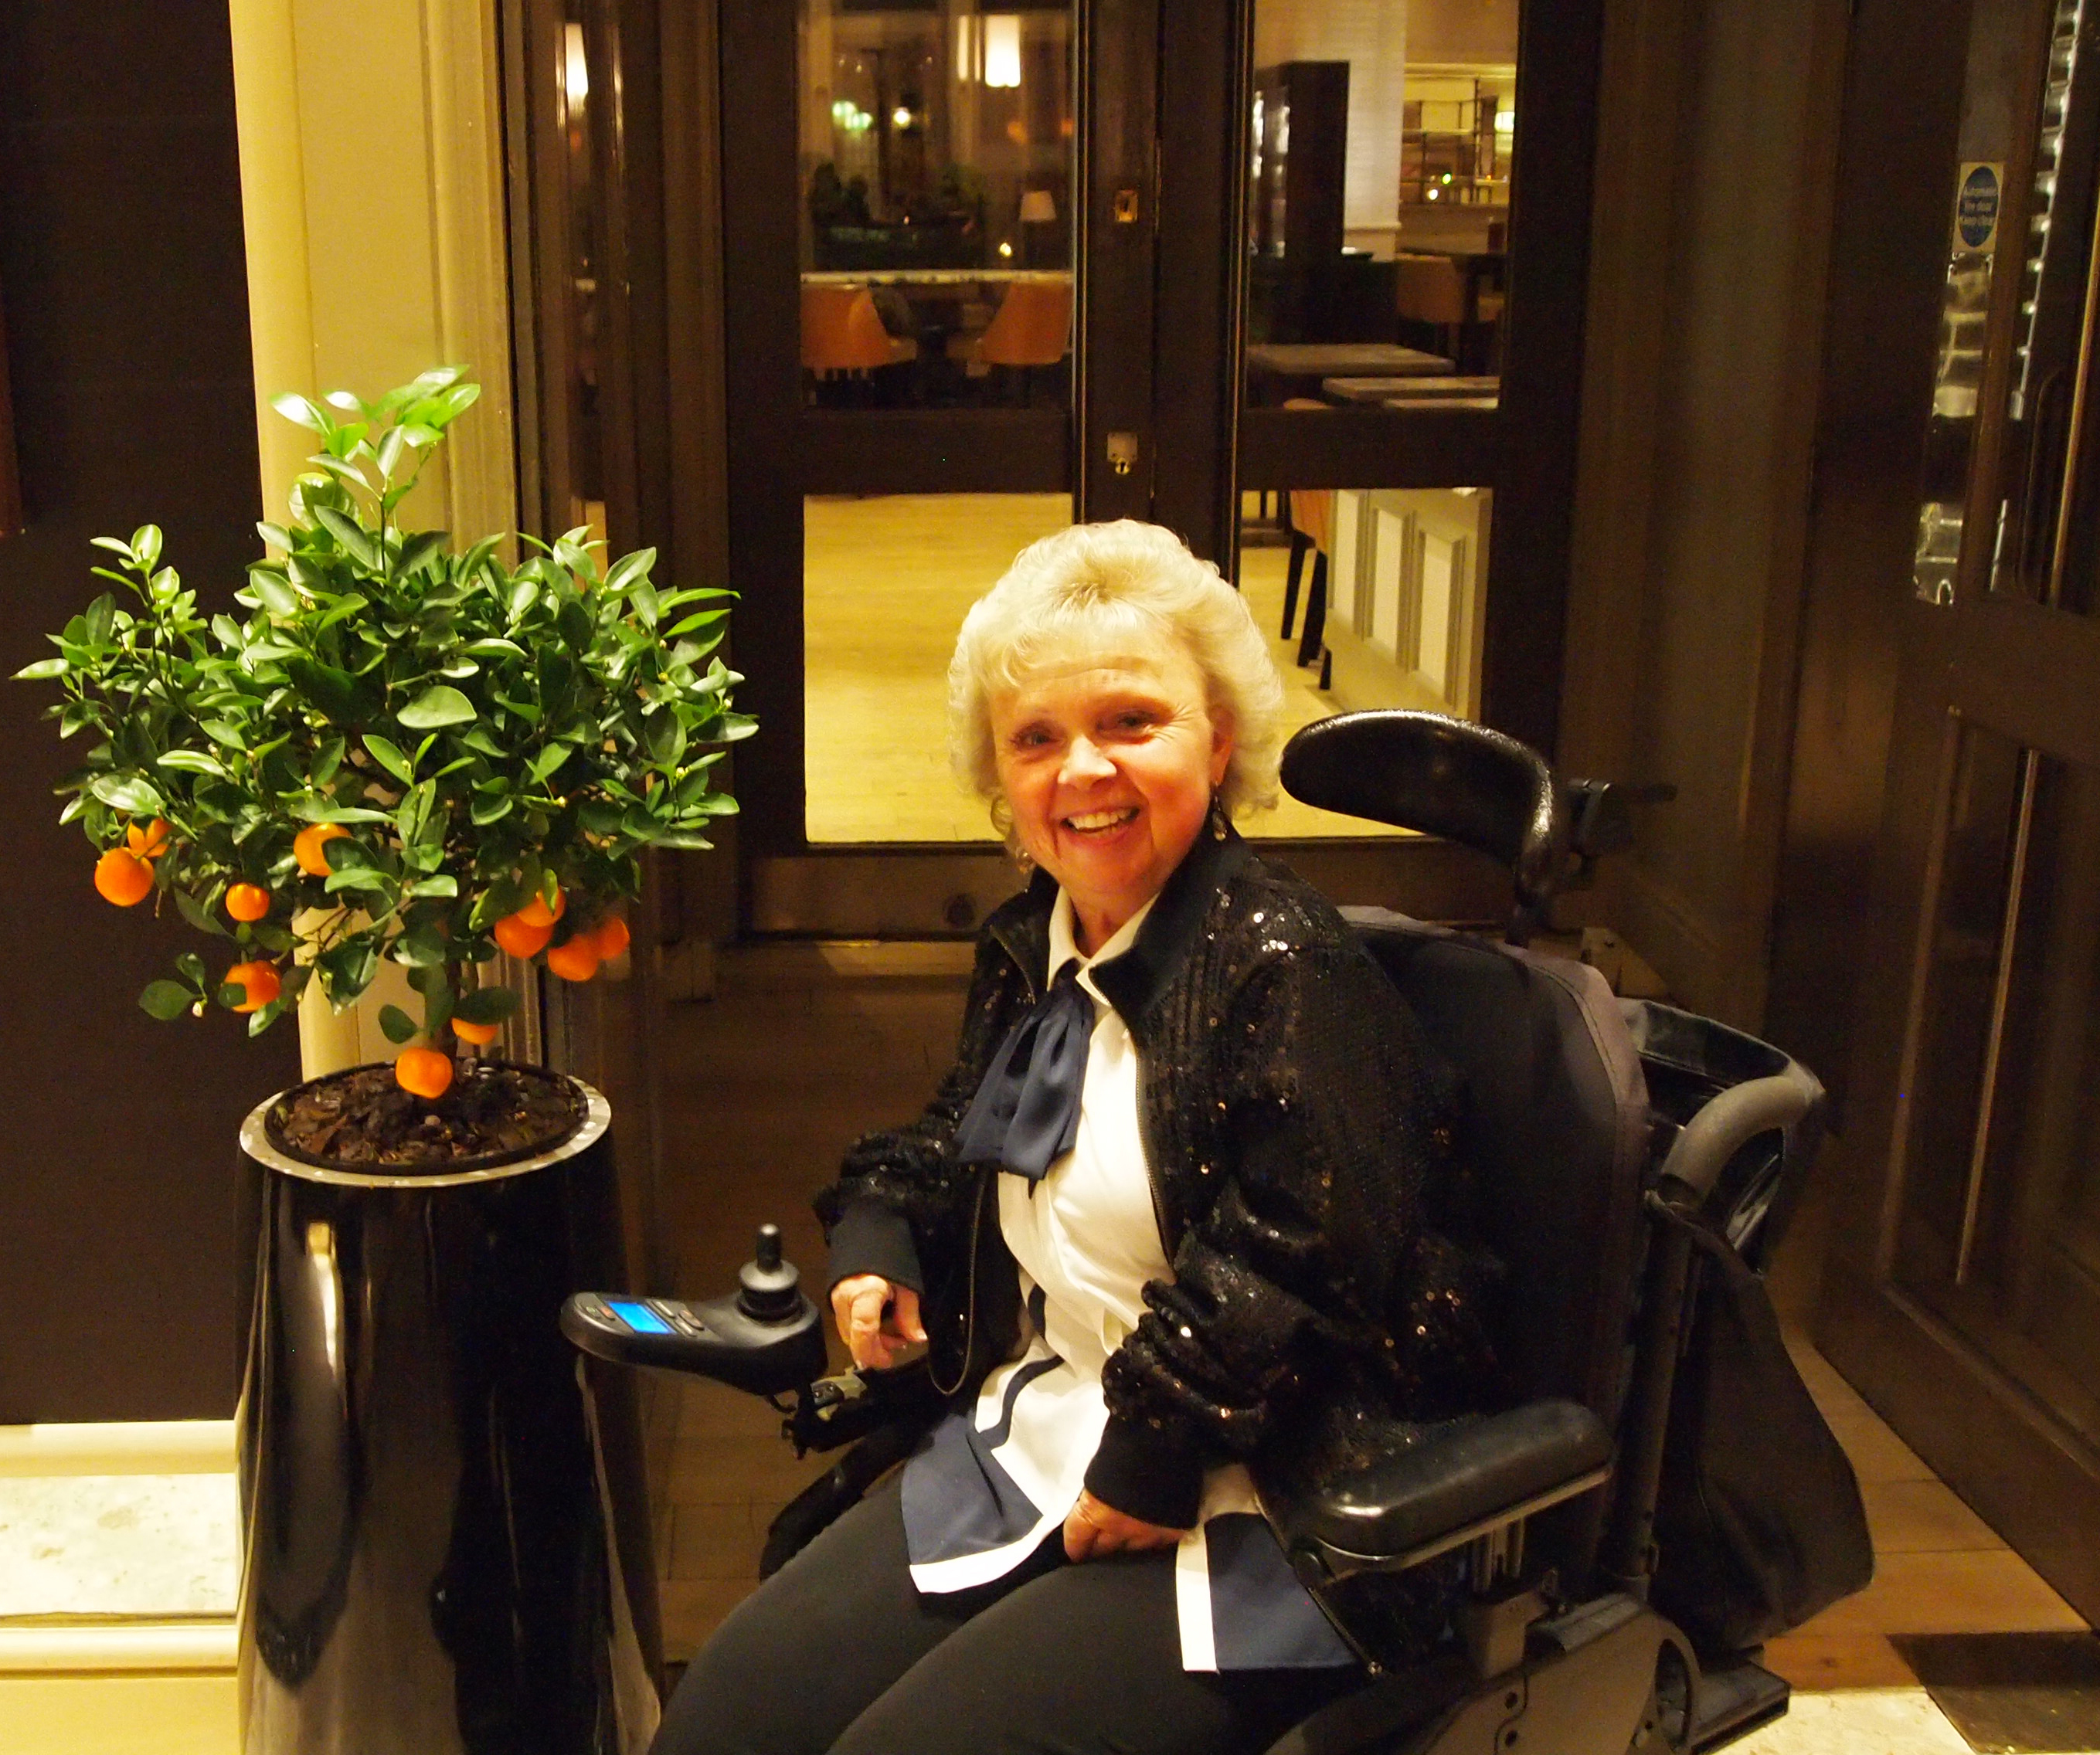 An image of Lynda. She is sitting in a wheelchair and smiling at the camera.